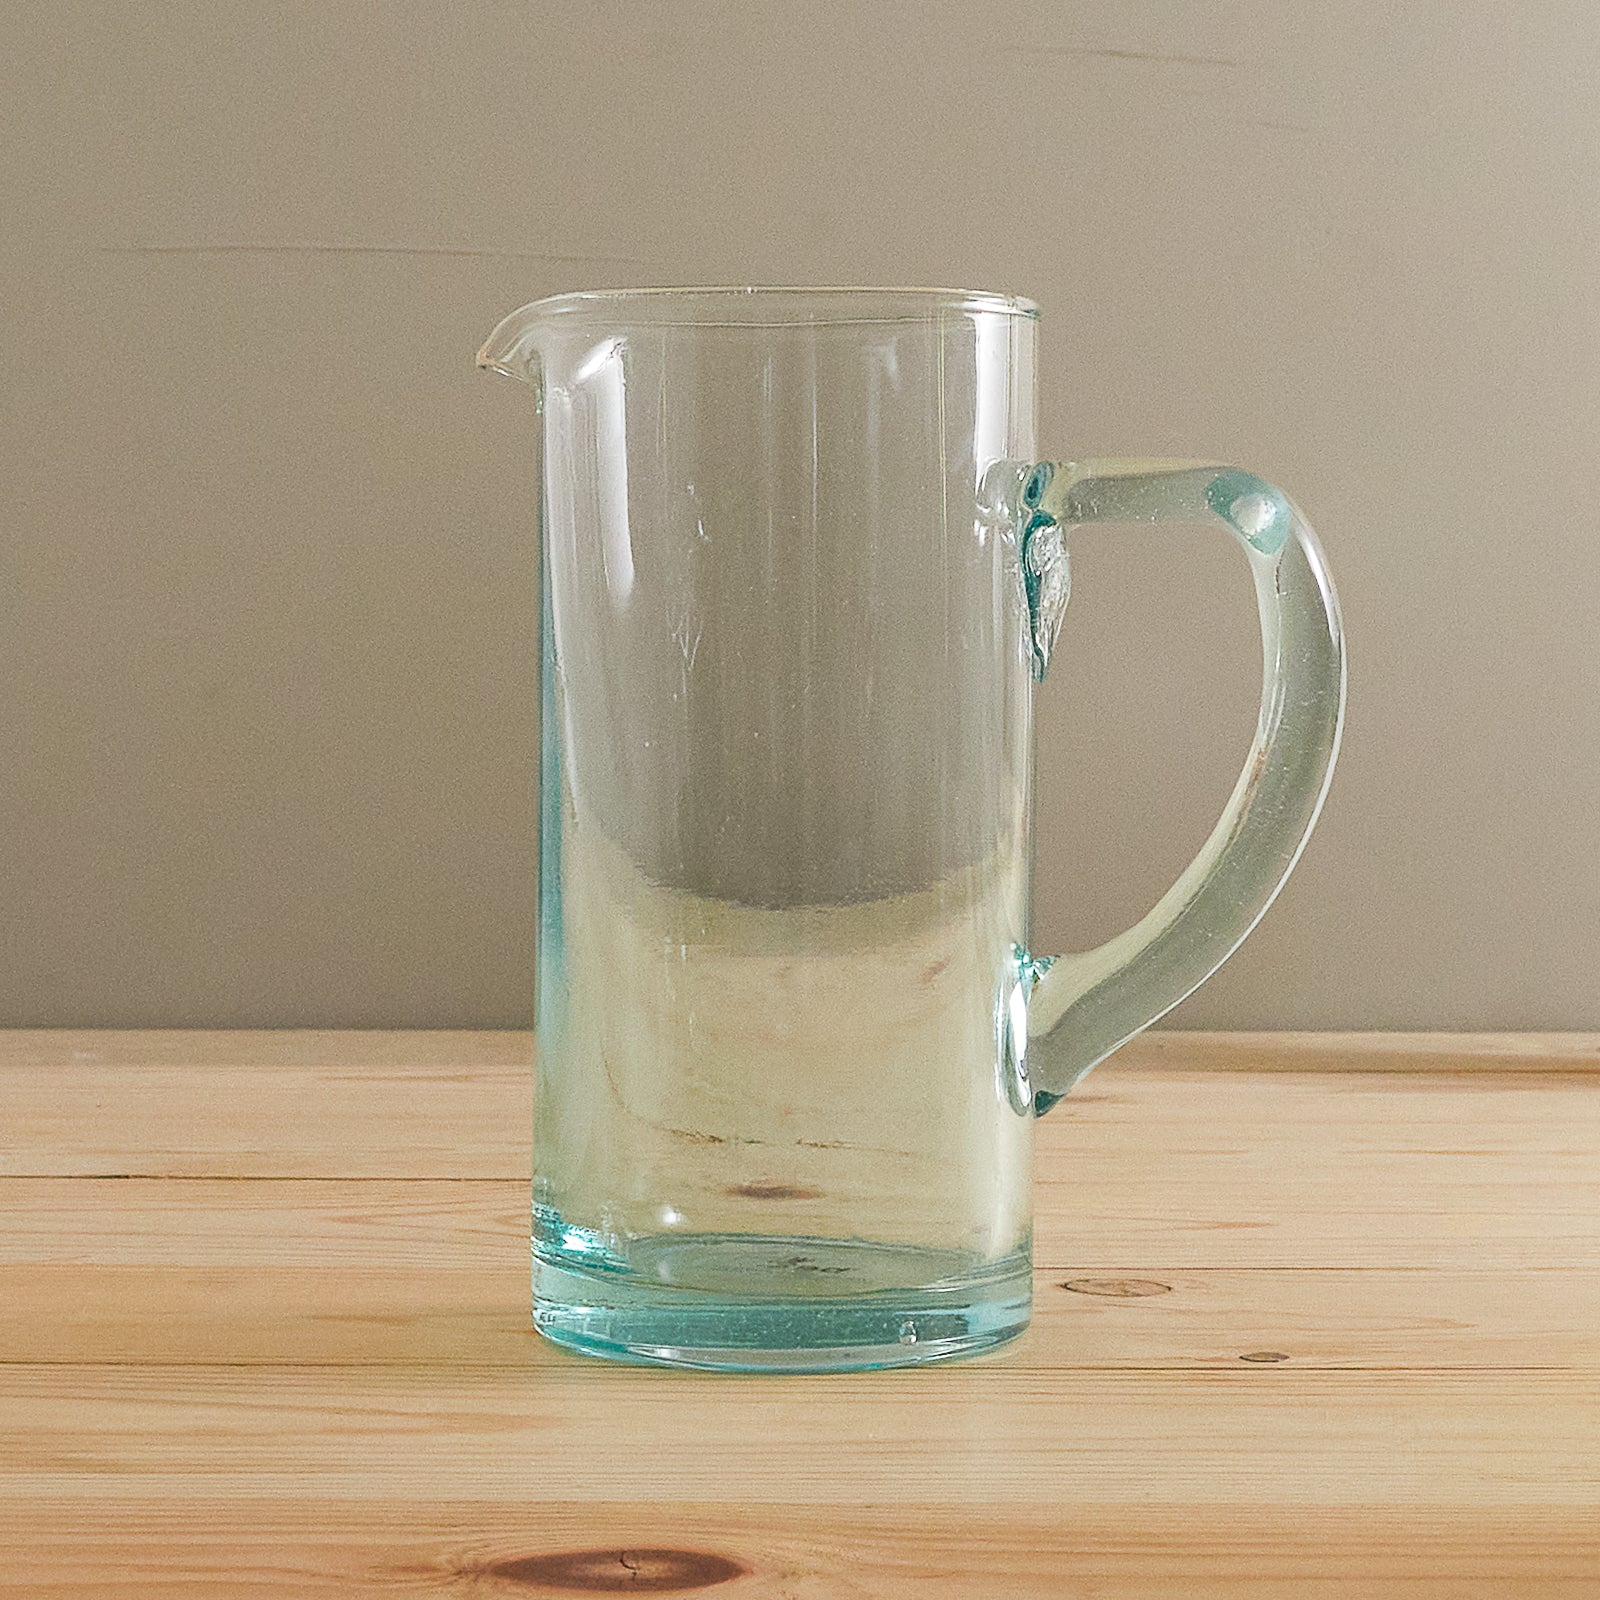 Heart Shaped Mug Glass Pitcher With Lid Carafes Mix Drinks Water